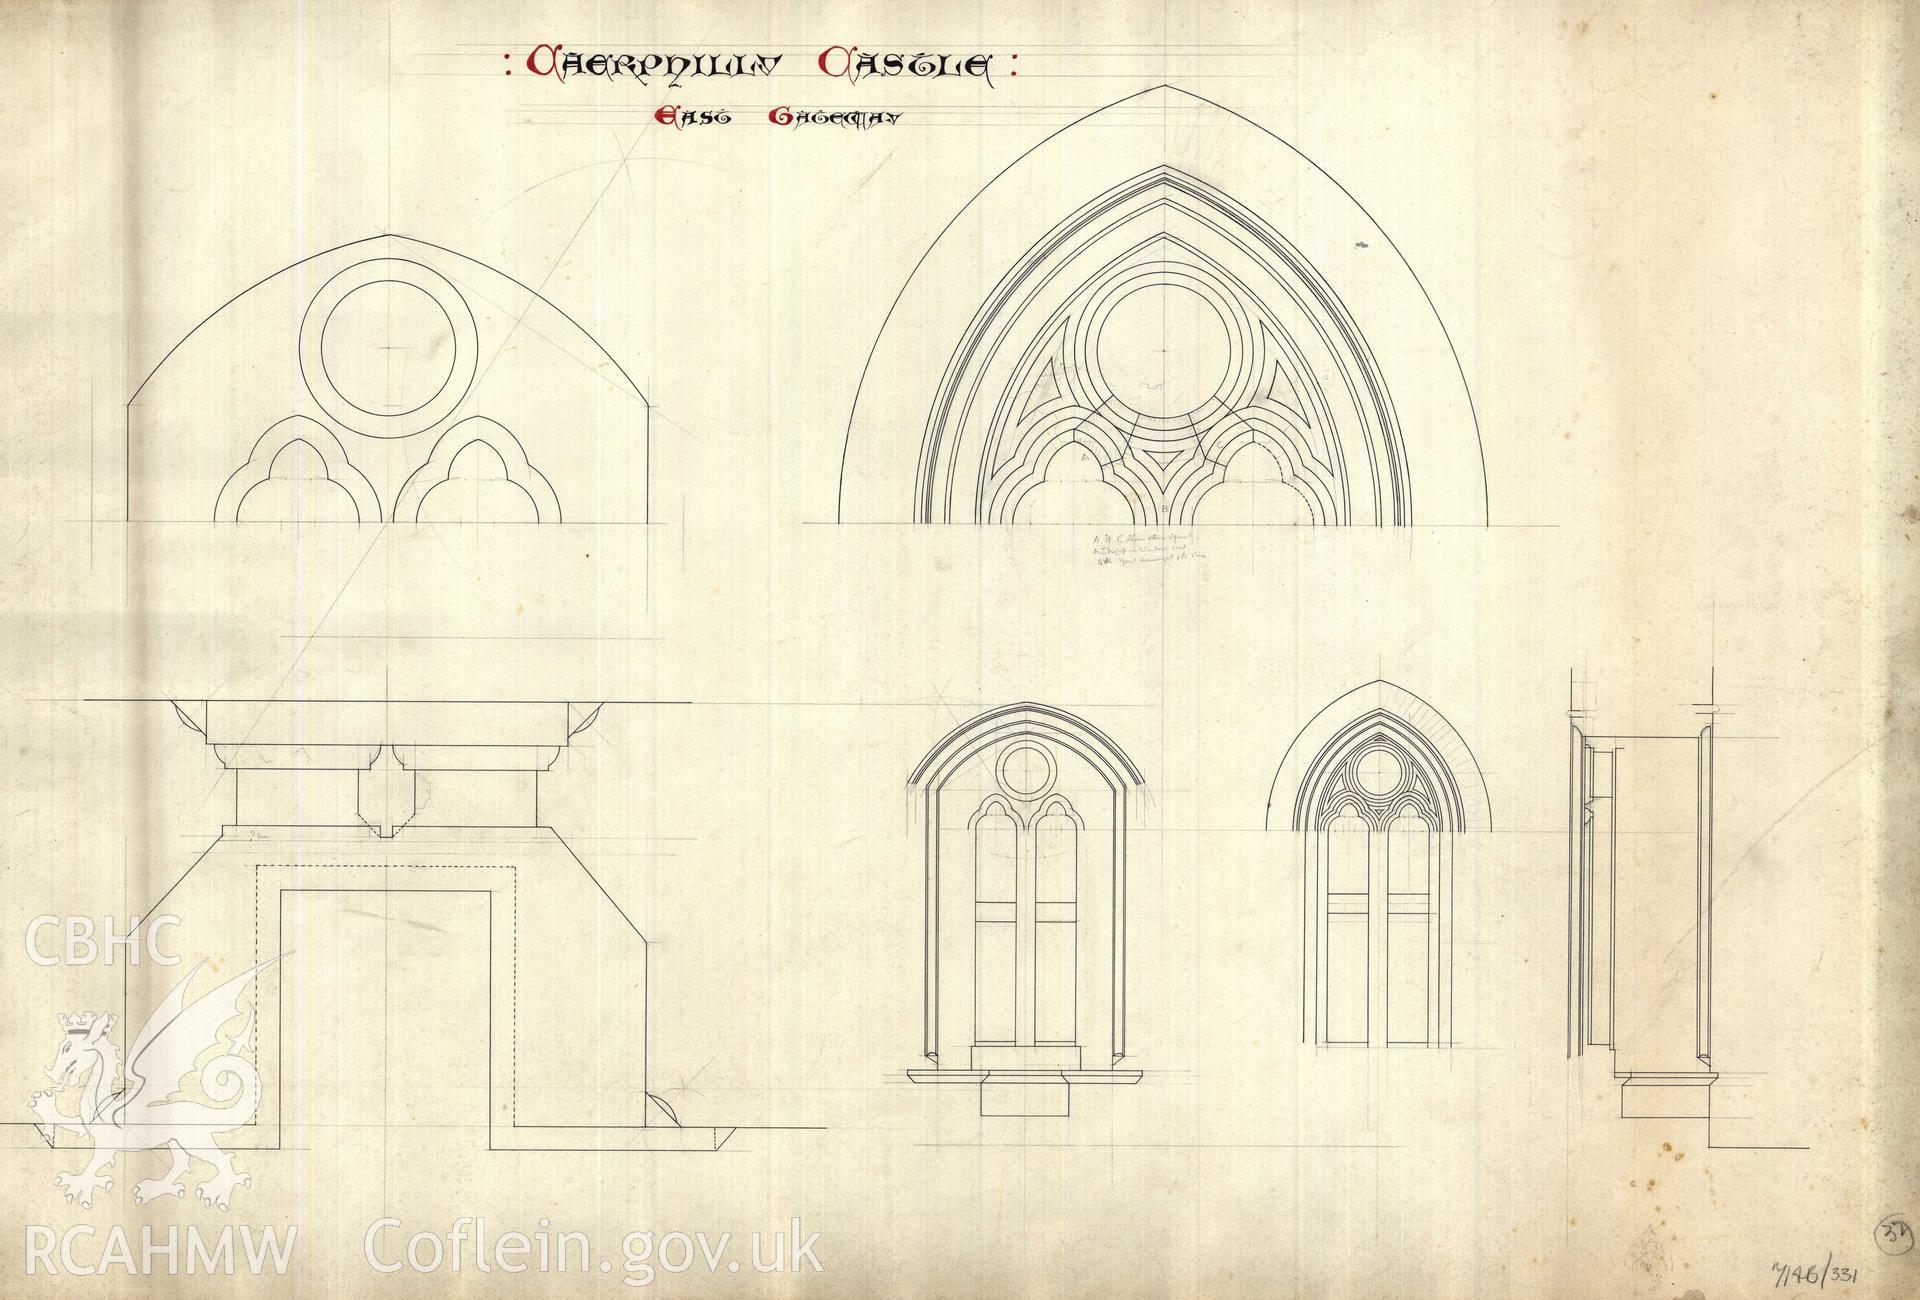 Cadw guardianship monument drawing of Caerphilly Castle. Details, East gateway. Cadw Ref. No. 714B/329. No scale.